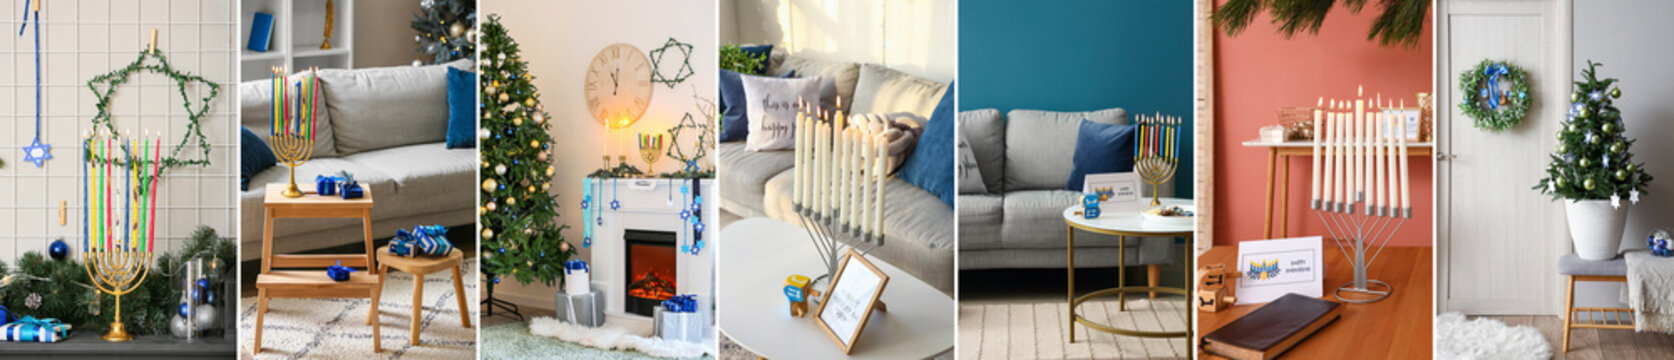 Collage of stylish interiors of room decorated for Hanukkah celebration